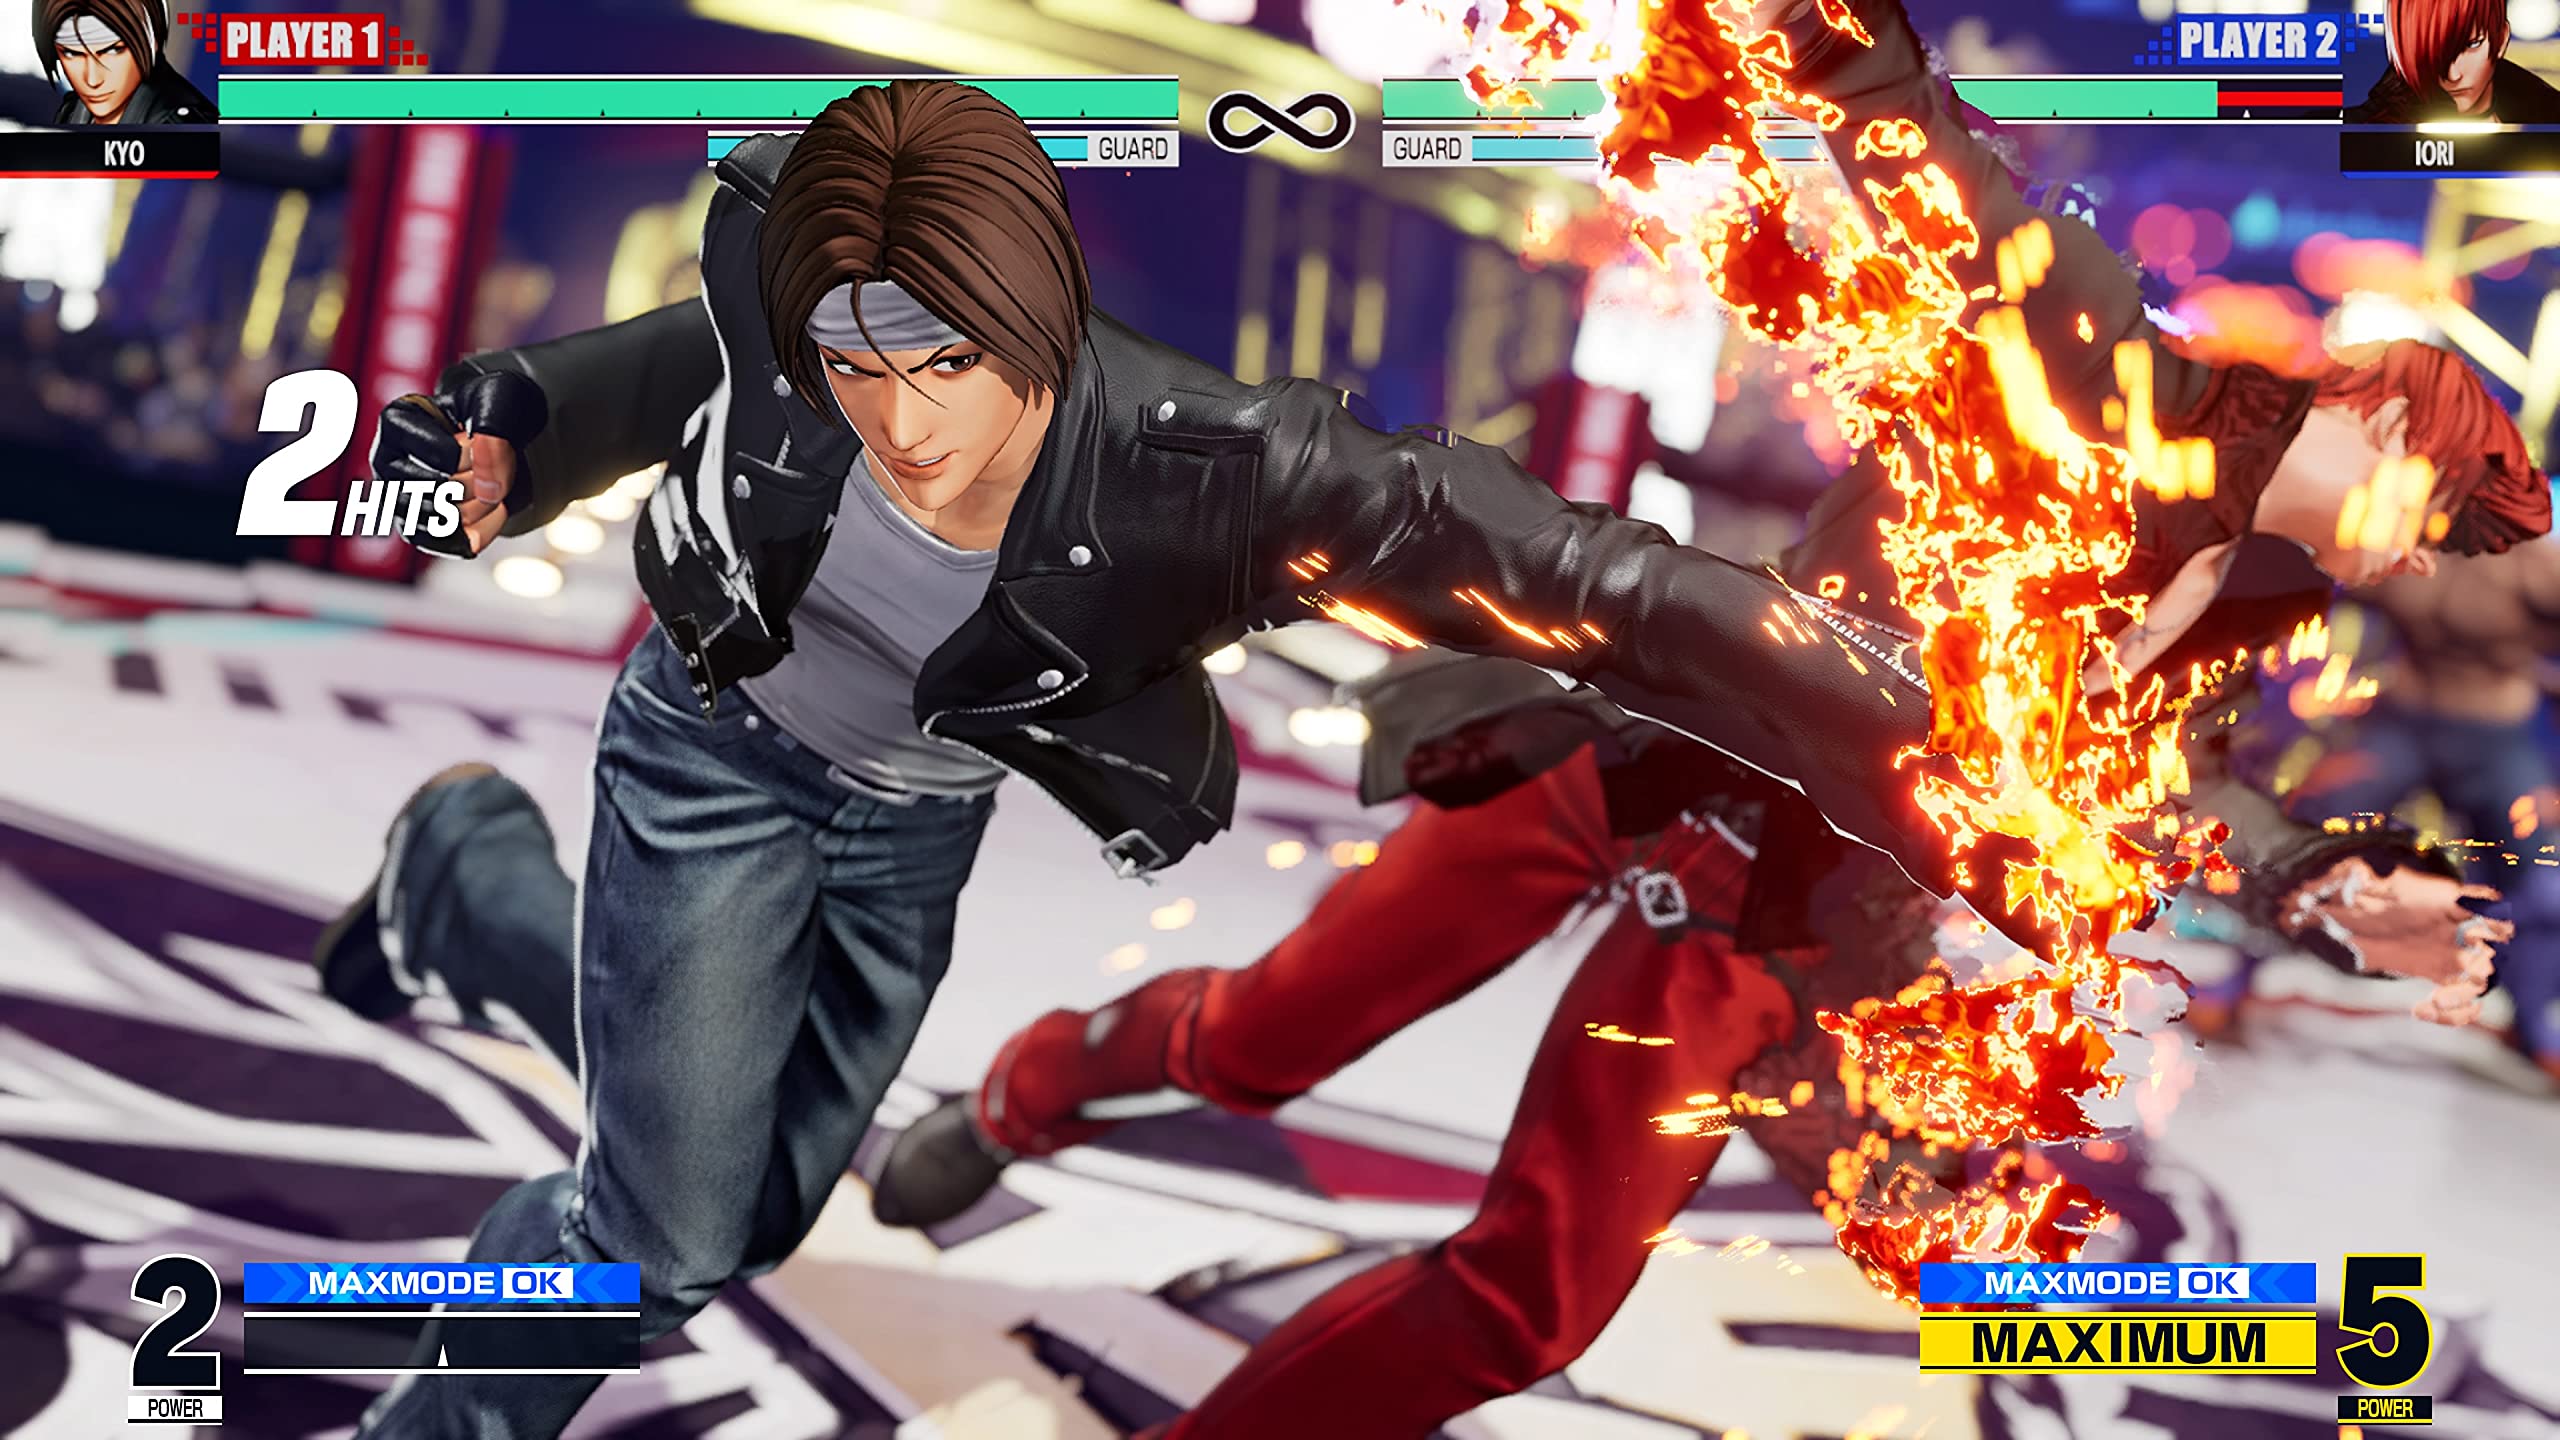 SNK has announced a new offensive system, Advanced Strike, in the next update of The King of Fighters 15, which will be released on January 30